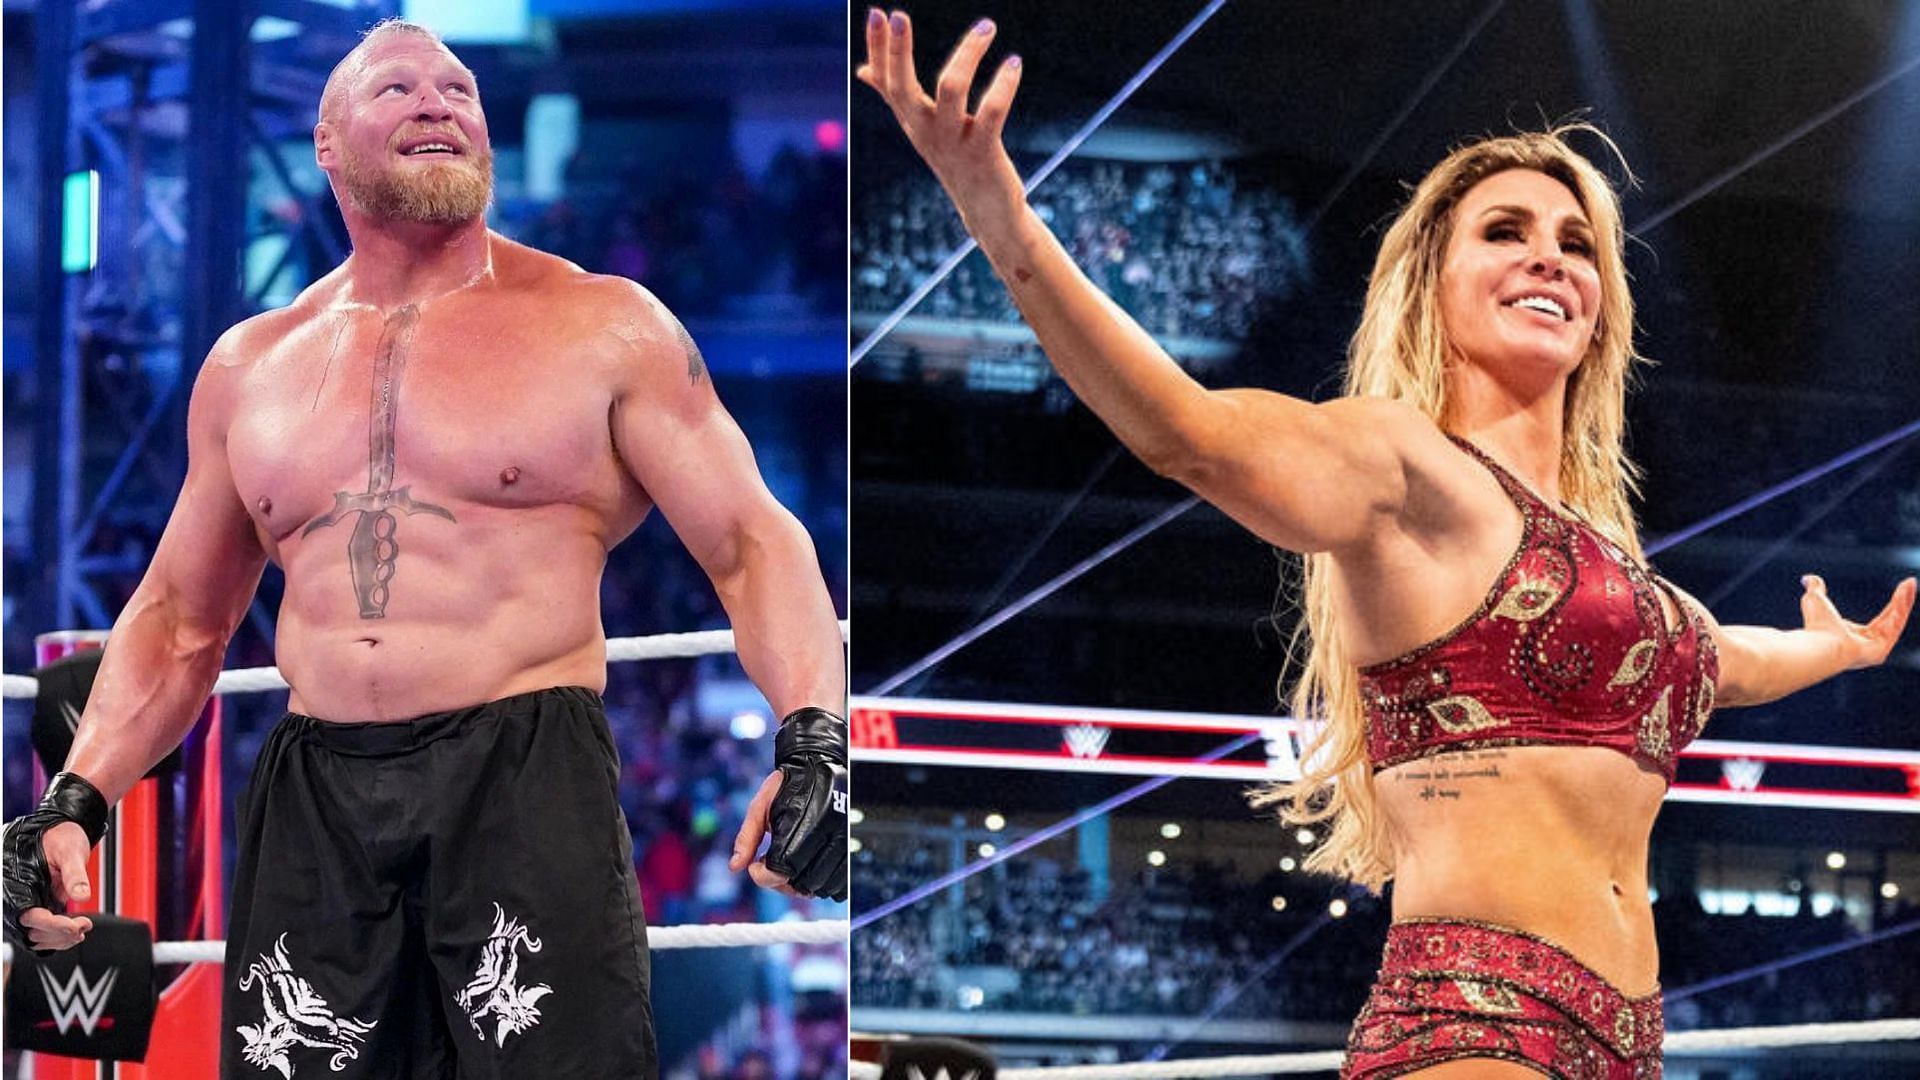 Brock Lesnar and Charlotte Flair were ill-conceived victors of the Rumble in recent memory